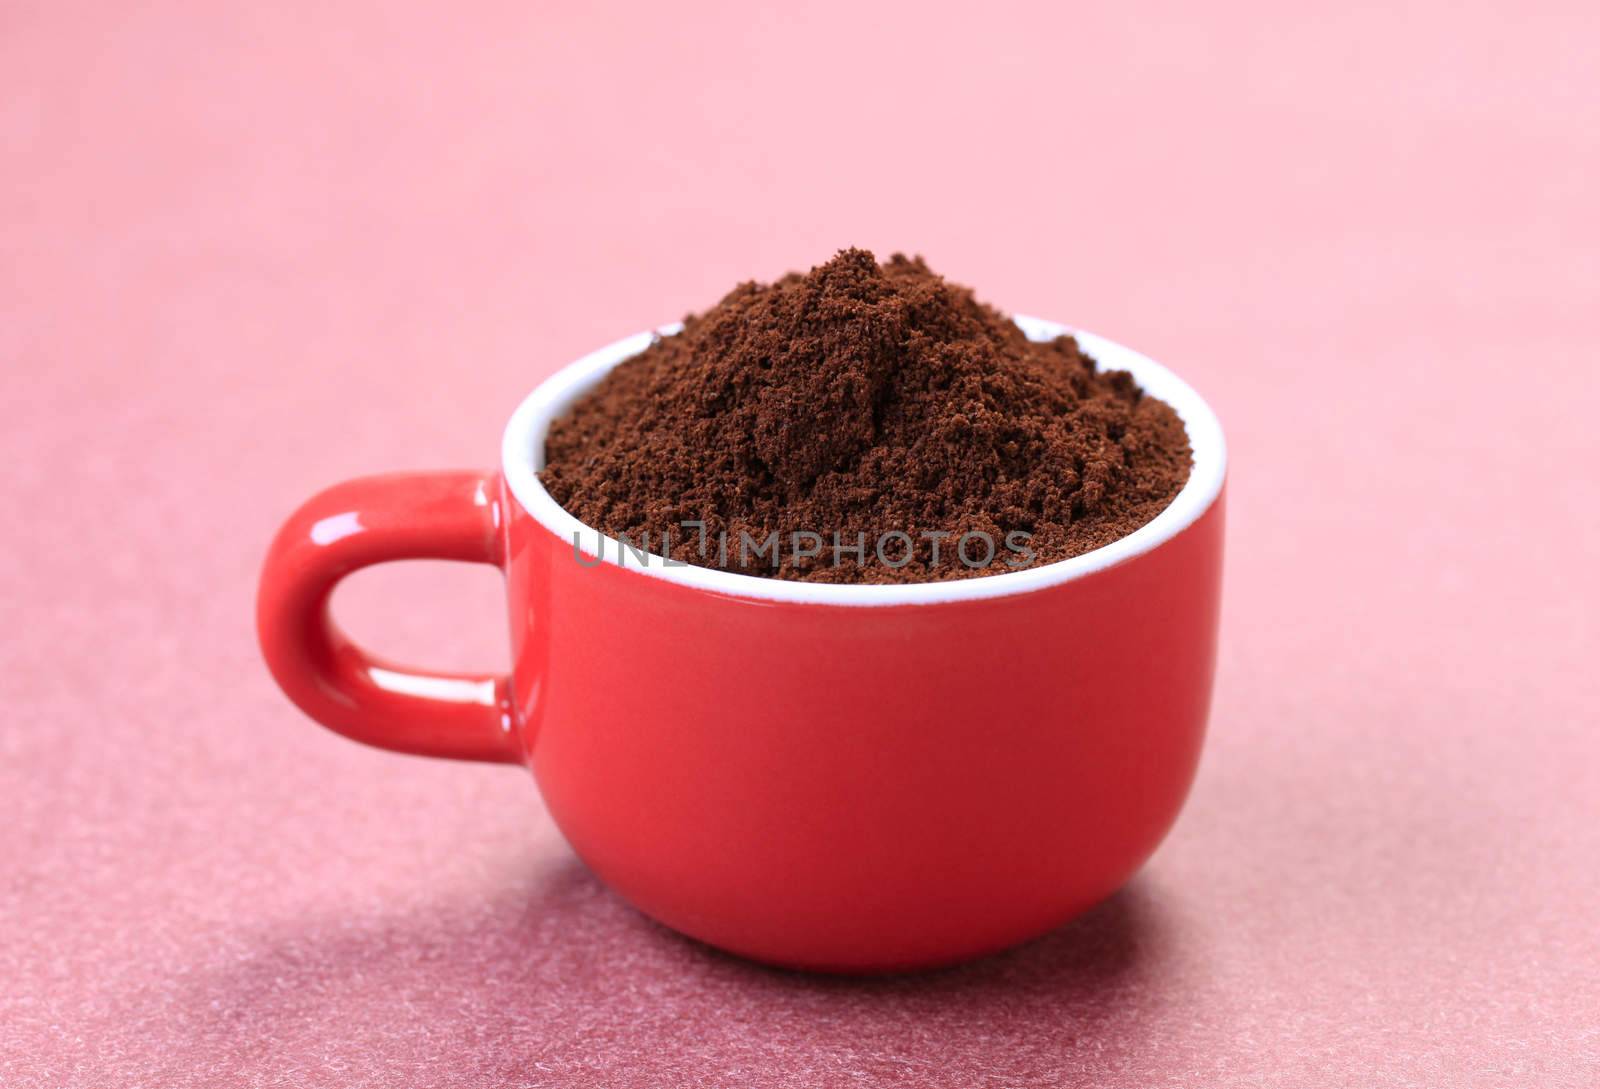 Heap of freshly ground coffee in a red cup